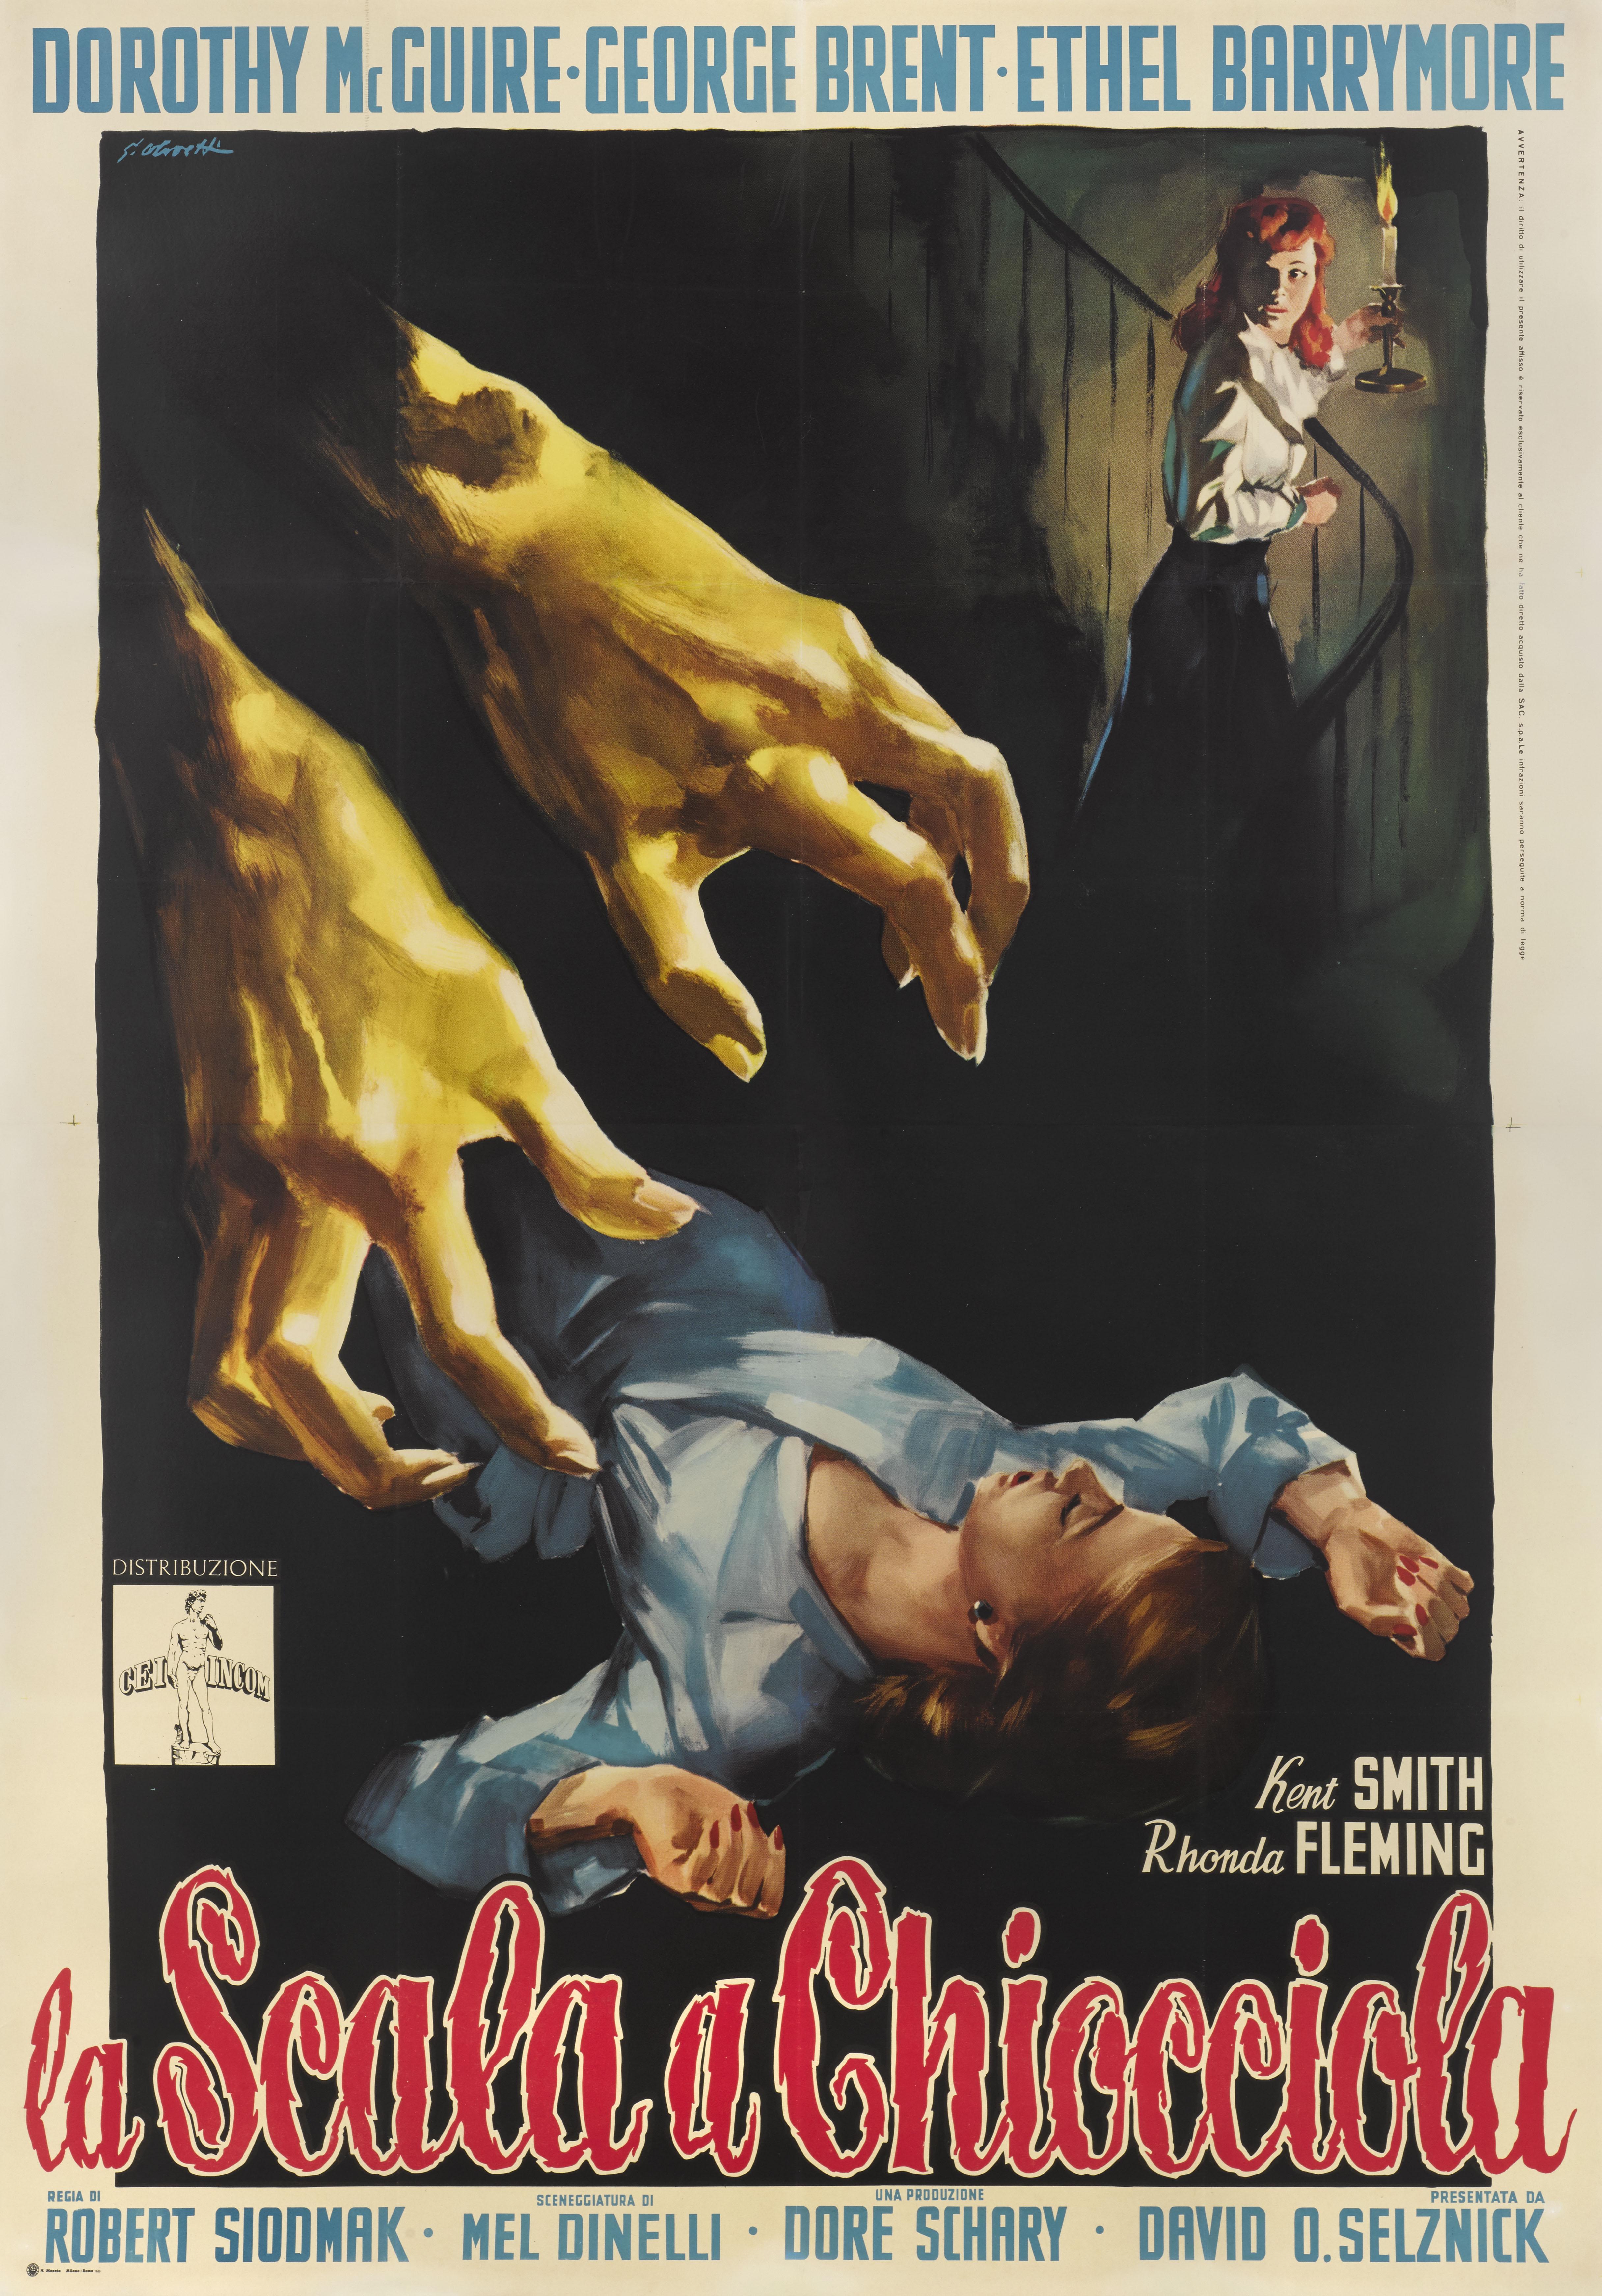 Original Italian film poster for the 1946 mystery, horror film The Spiral Staircase.
This film was directed by Robert Siodmak and stared Dorothy McGuire, George Brent, Ethel Barrymore .
The atmospheric artwork on this poster is by Giorgio Olivetti